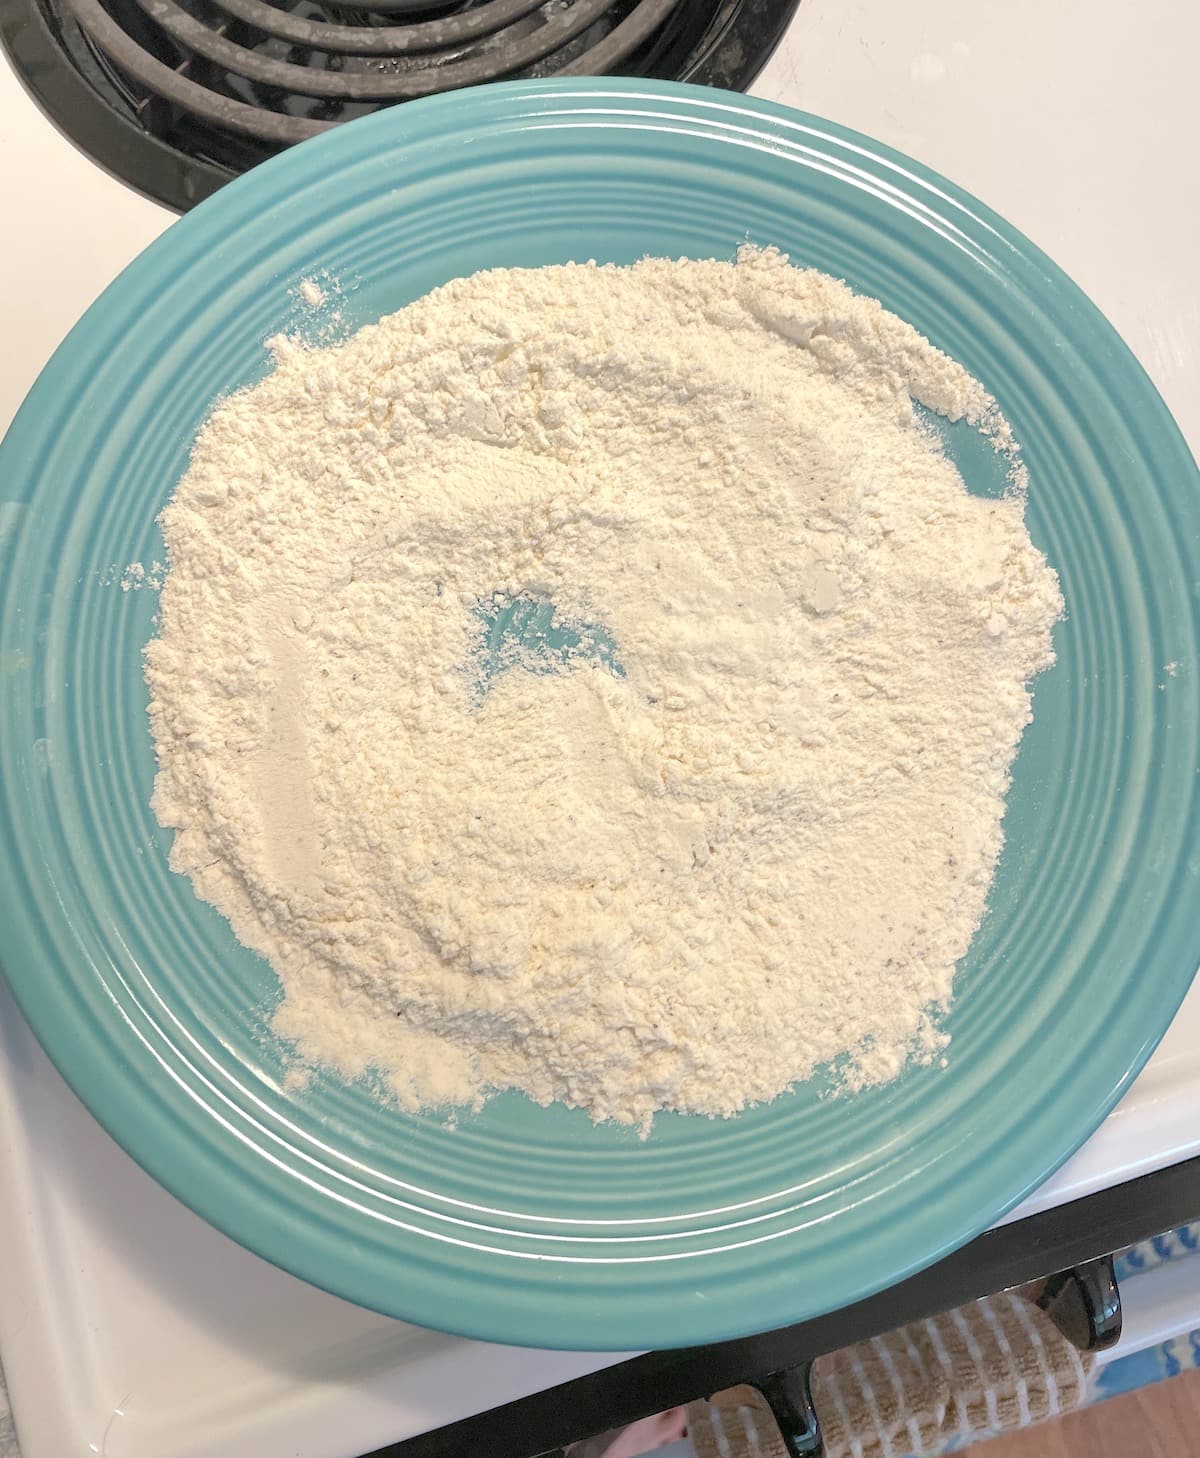 A blue plate with a flour mixture for breading fish fillets on it.